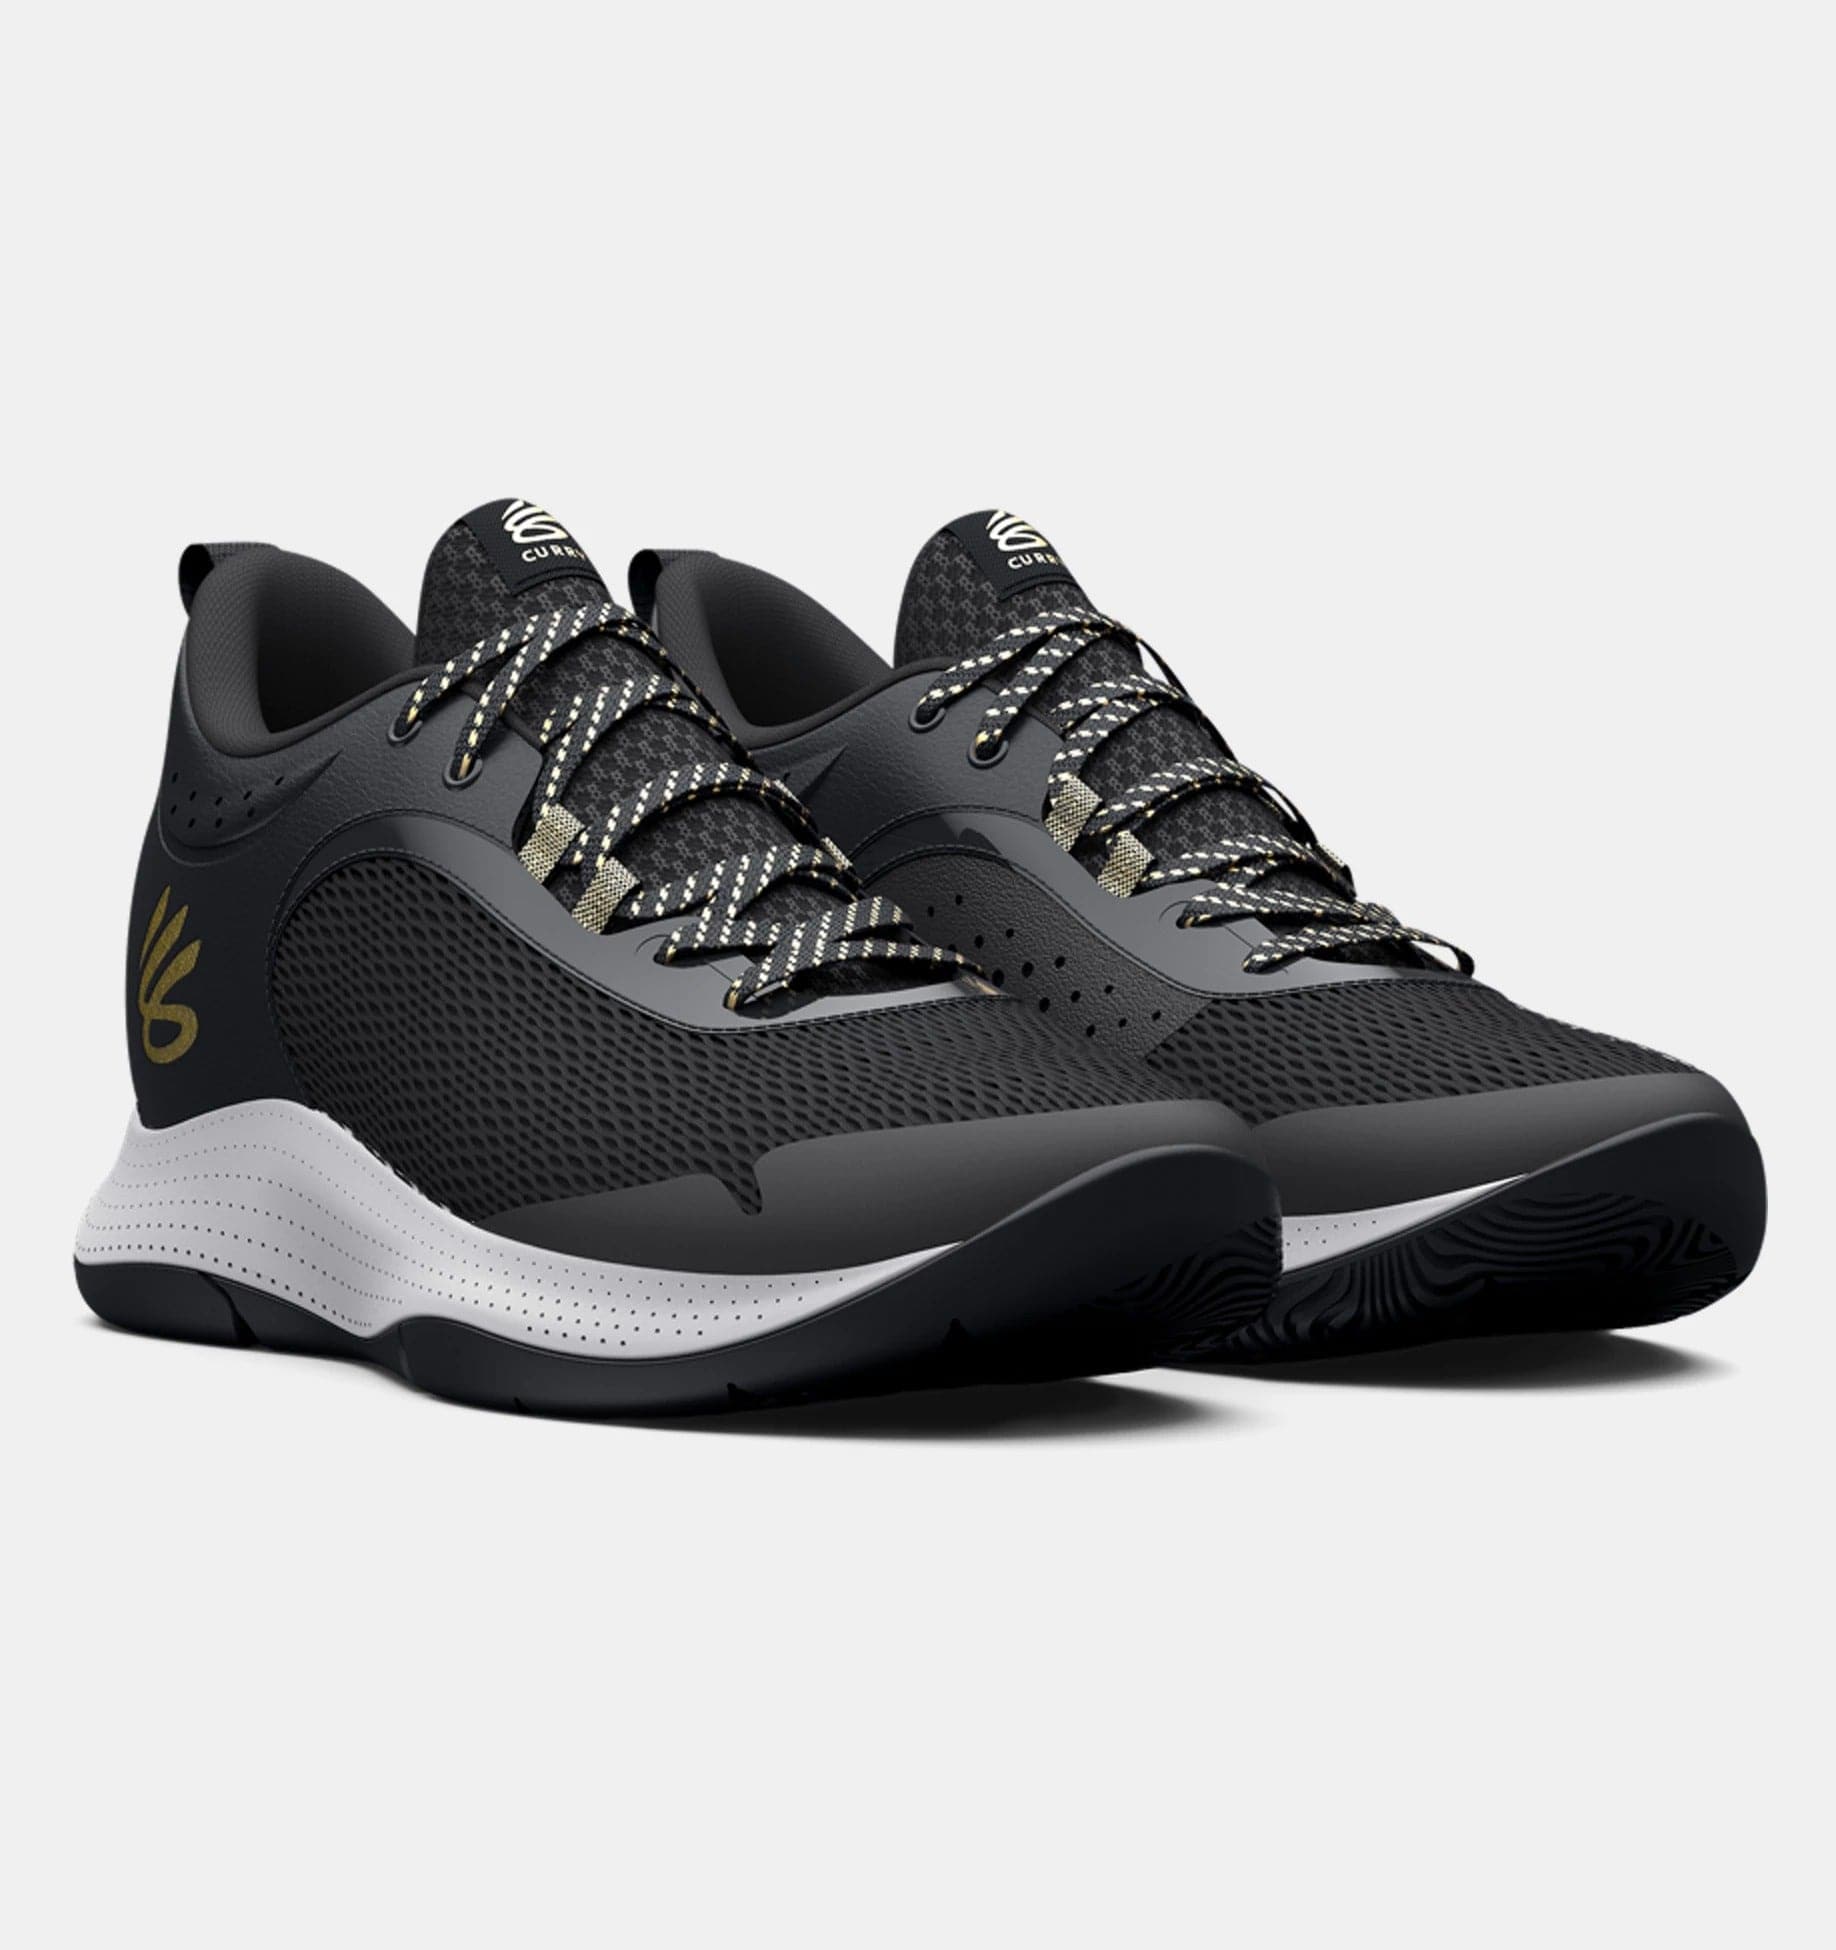 Curry 3Z6 Basketball Shoes